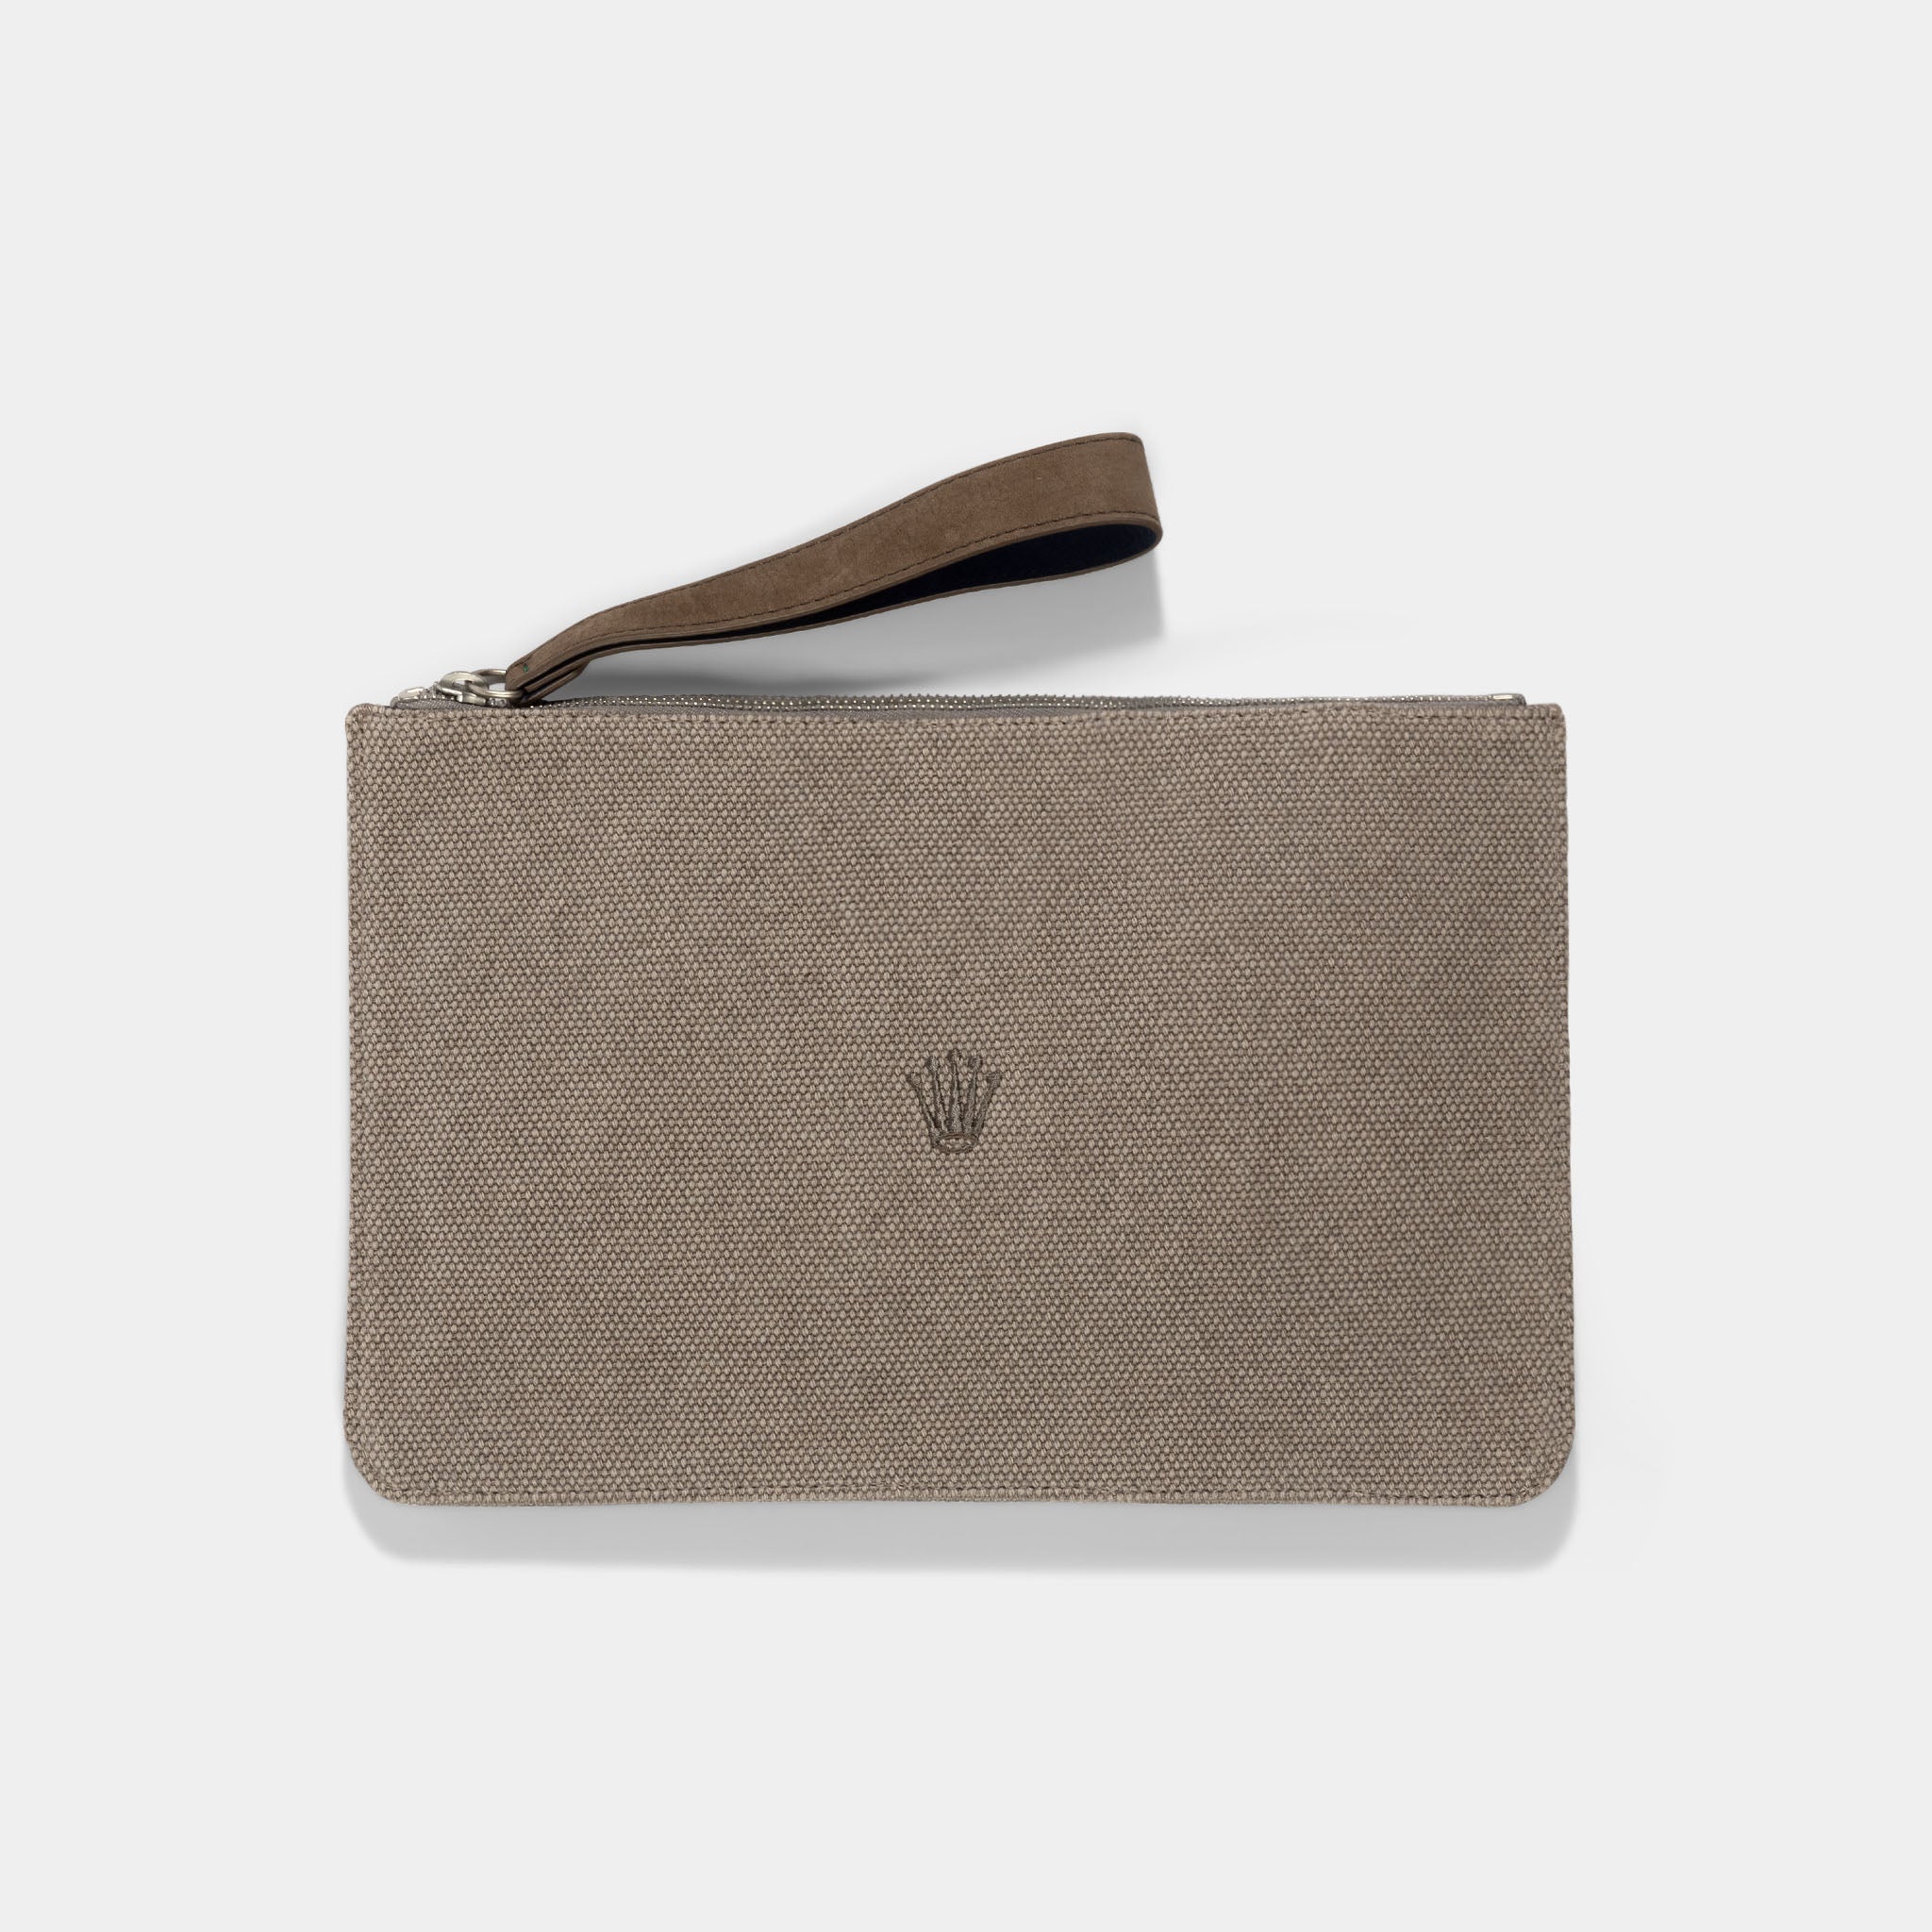 Rolex_Luxury_Novelty_Canvas_and_Leather_Ipad_Sleeve